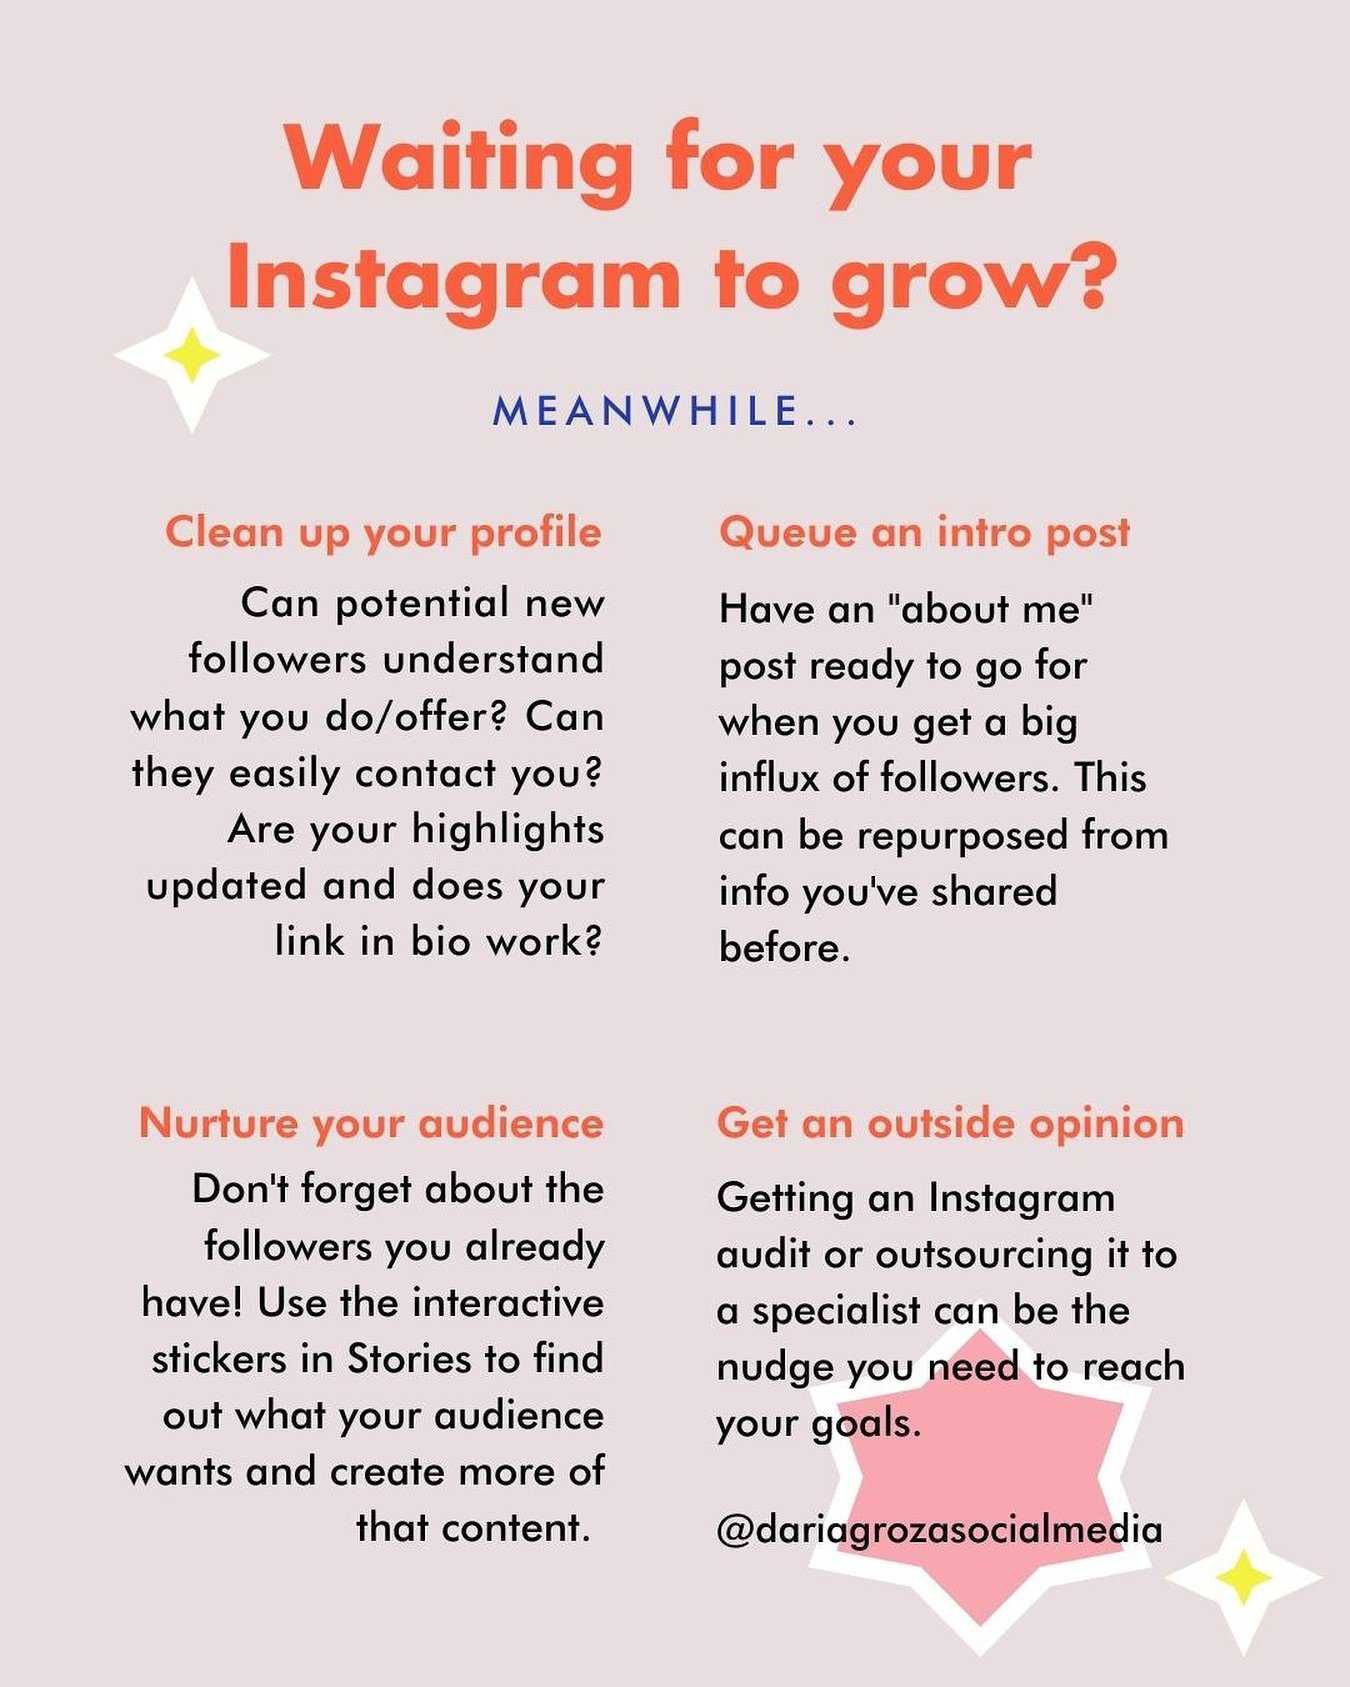 Waiting is no fun&hellip; how about you keep busy in the meantime? 

SAVE this post if you don&rsquo;t know what to do while waiting for your Instagram to grow 👆

#smallbizmarketing&nbsp;#instastrategy&nbsp;#igtips&nbsp;#contentmarketing&nbsp;#makrt